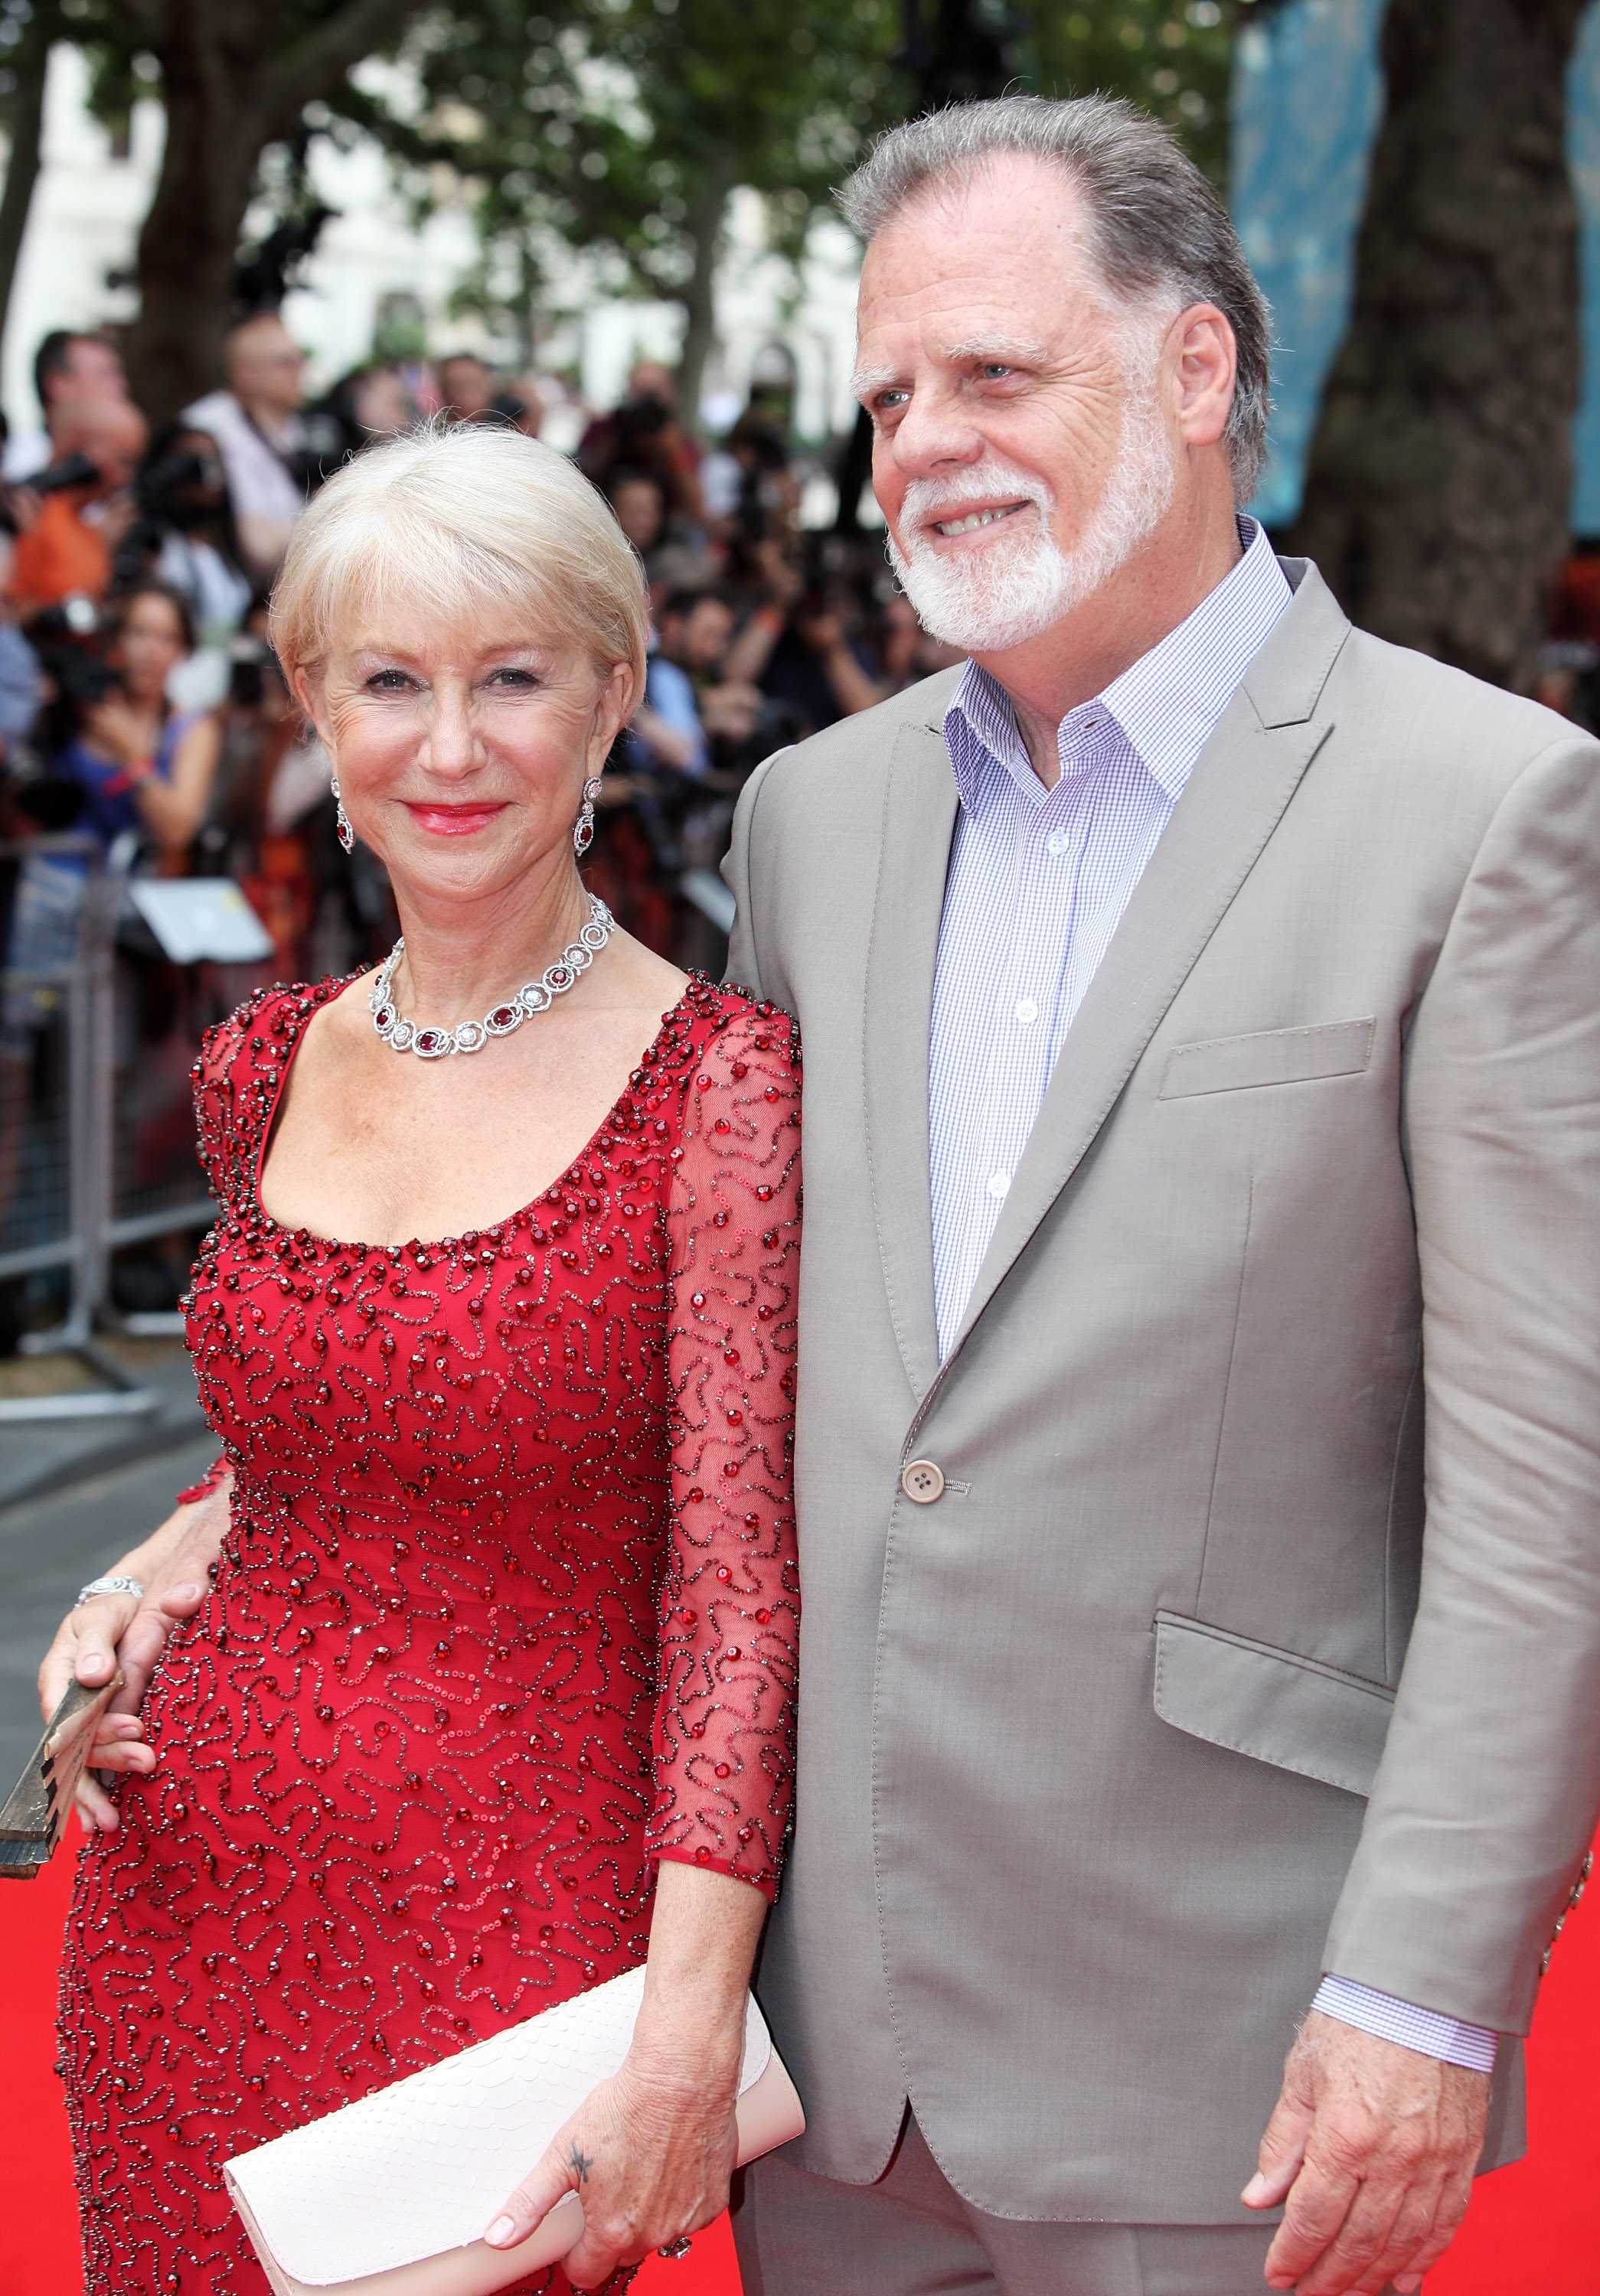 Dame Helen Mirren and husband Taylor Hackford in London, England on July 22, 2013 | Source: Getty Images